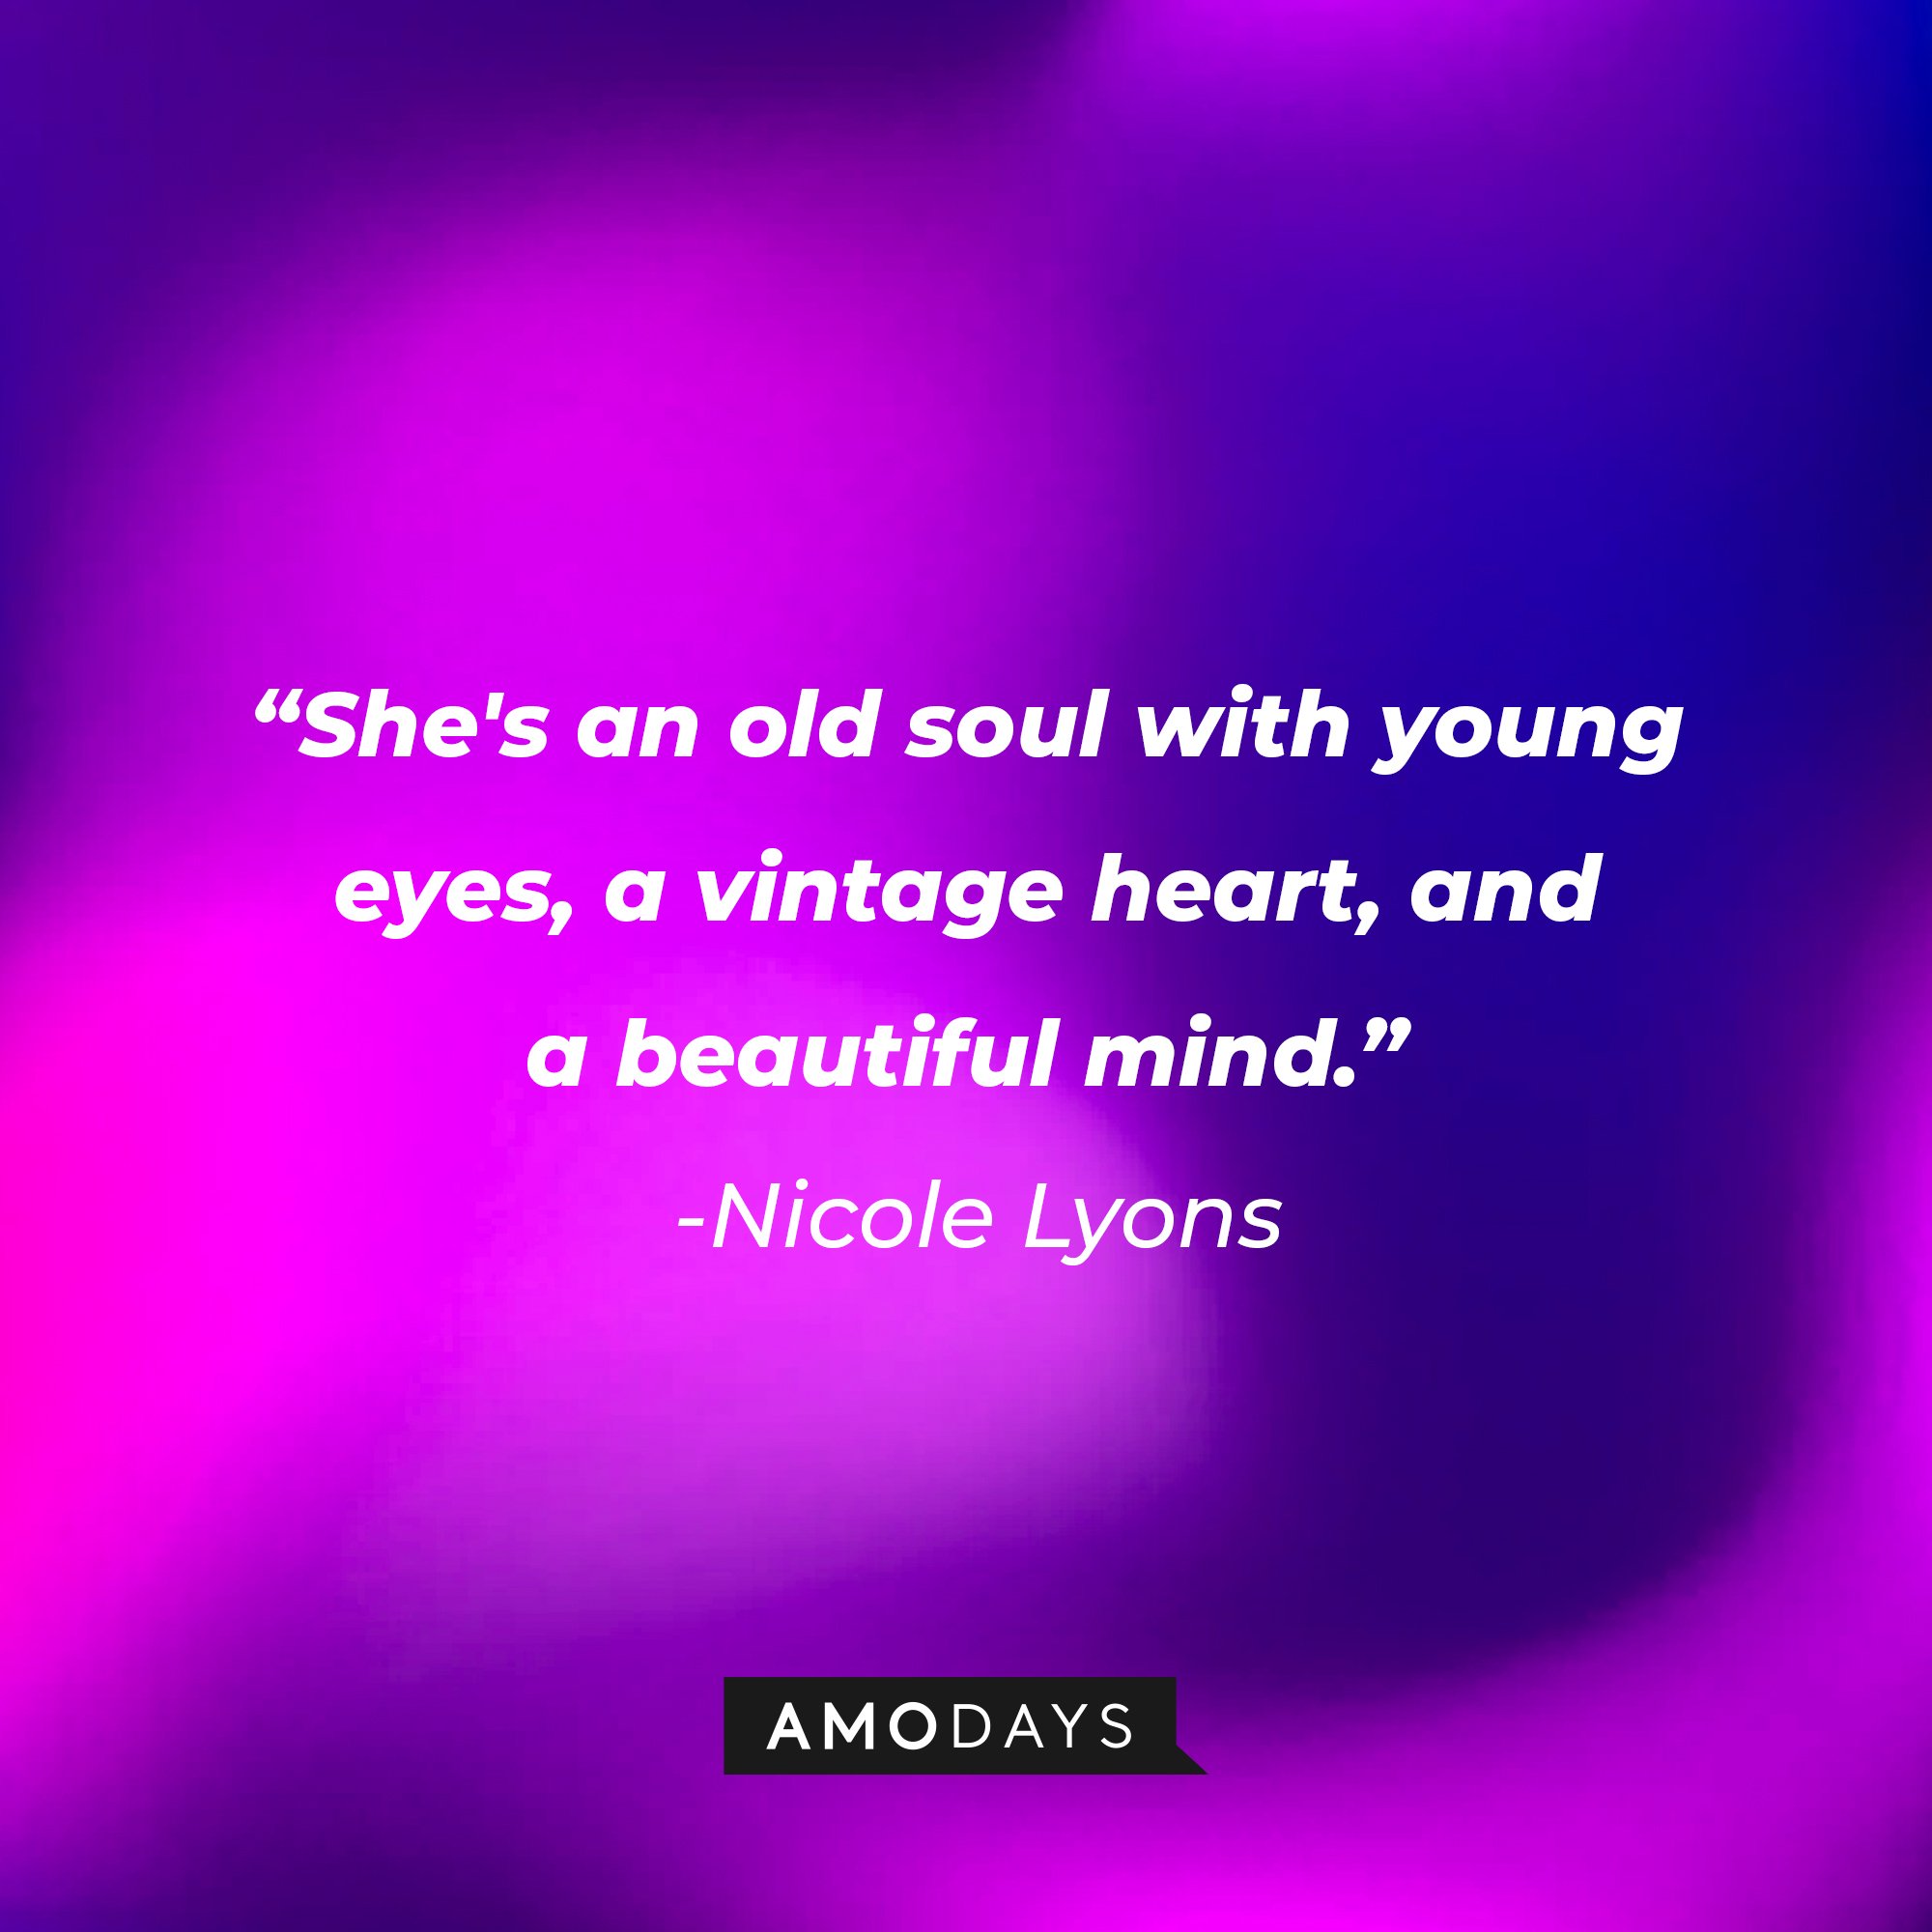  Nicole Lyons’s quote: "She's an old soul with young eyes, a vintage heart, and a beautiful mind." | Image: AmoDays